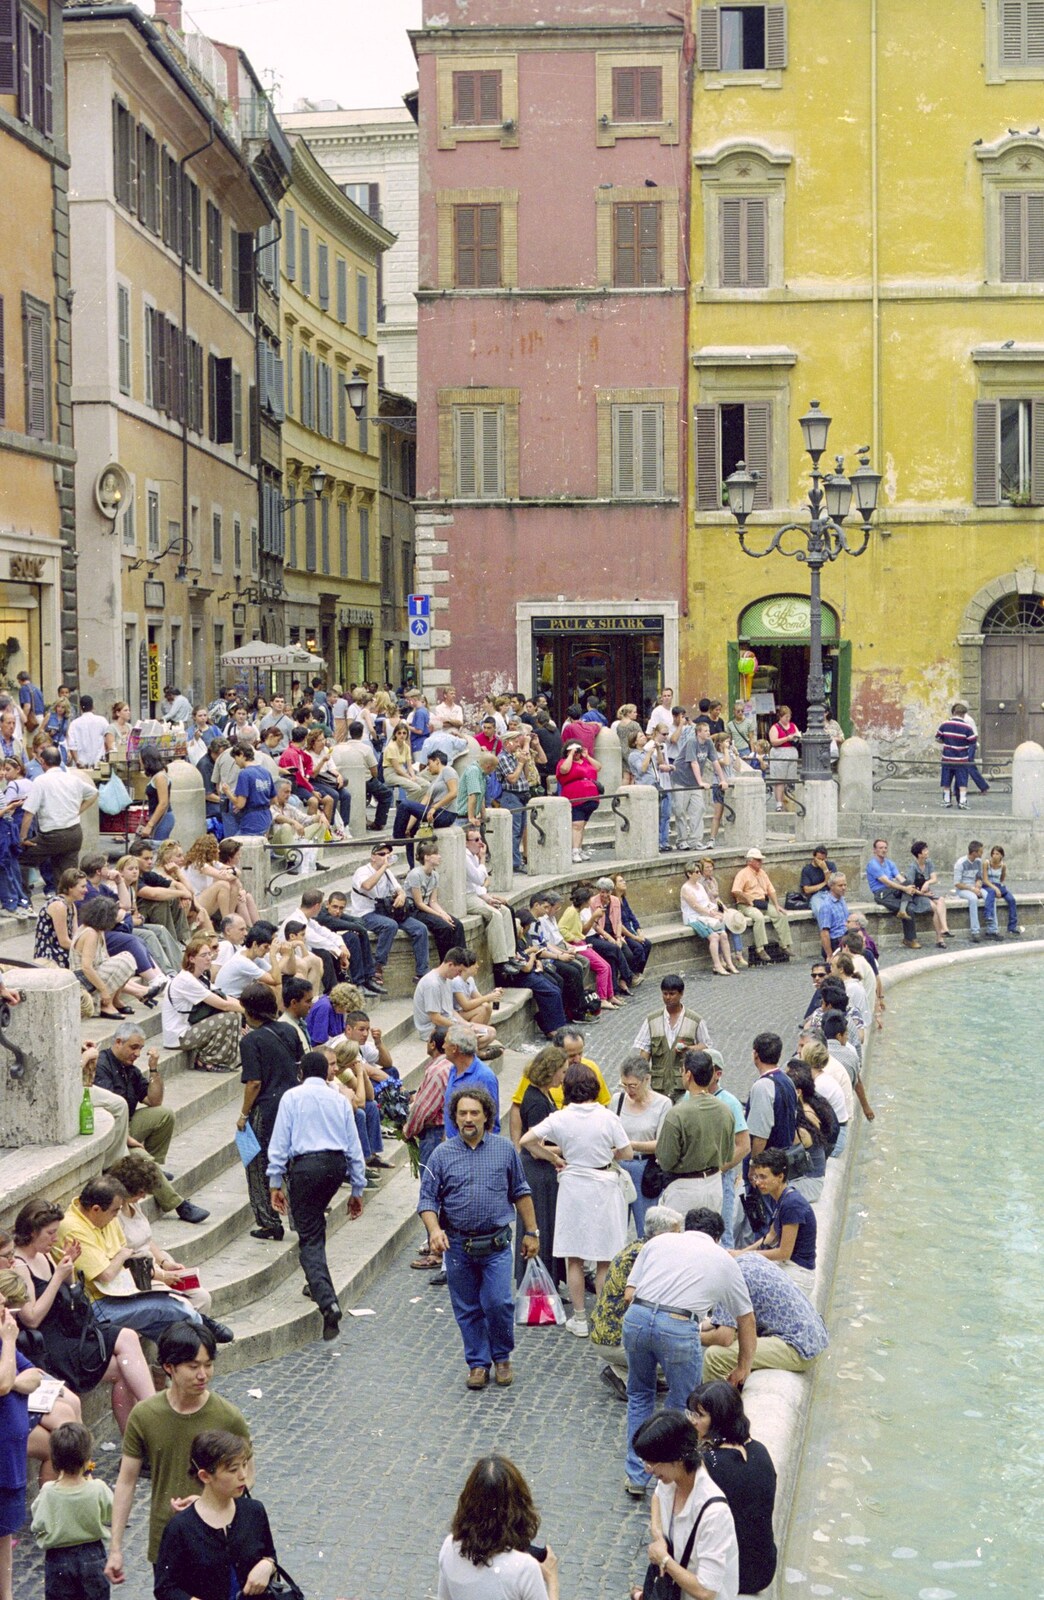 Crowds by the Trevi Fountain from A Working Trip to Rome, Italy - 10th September 1999